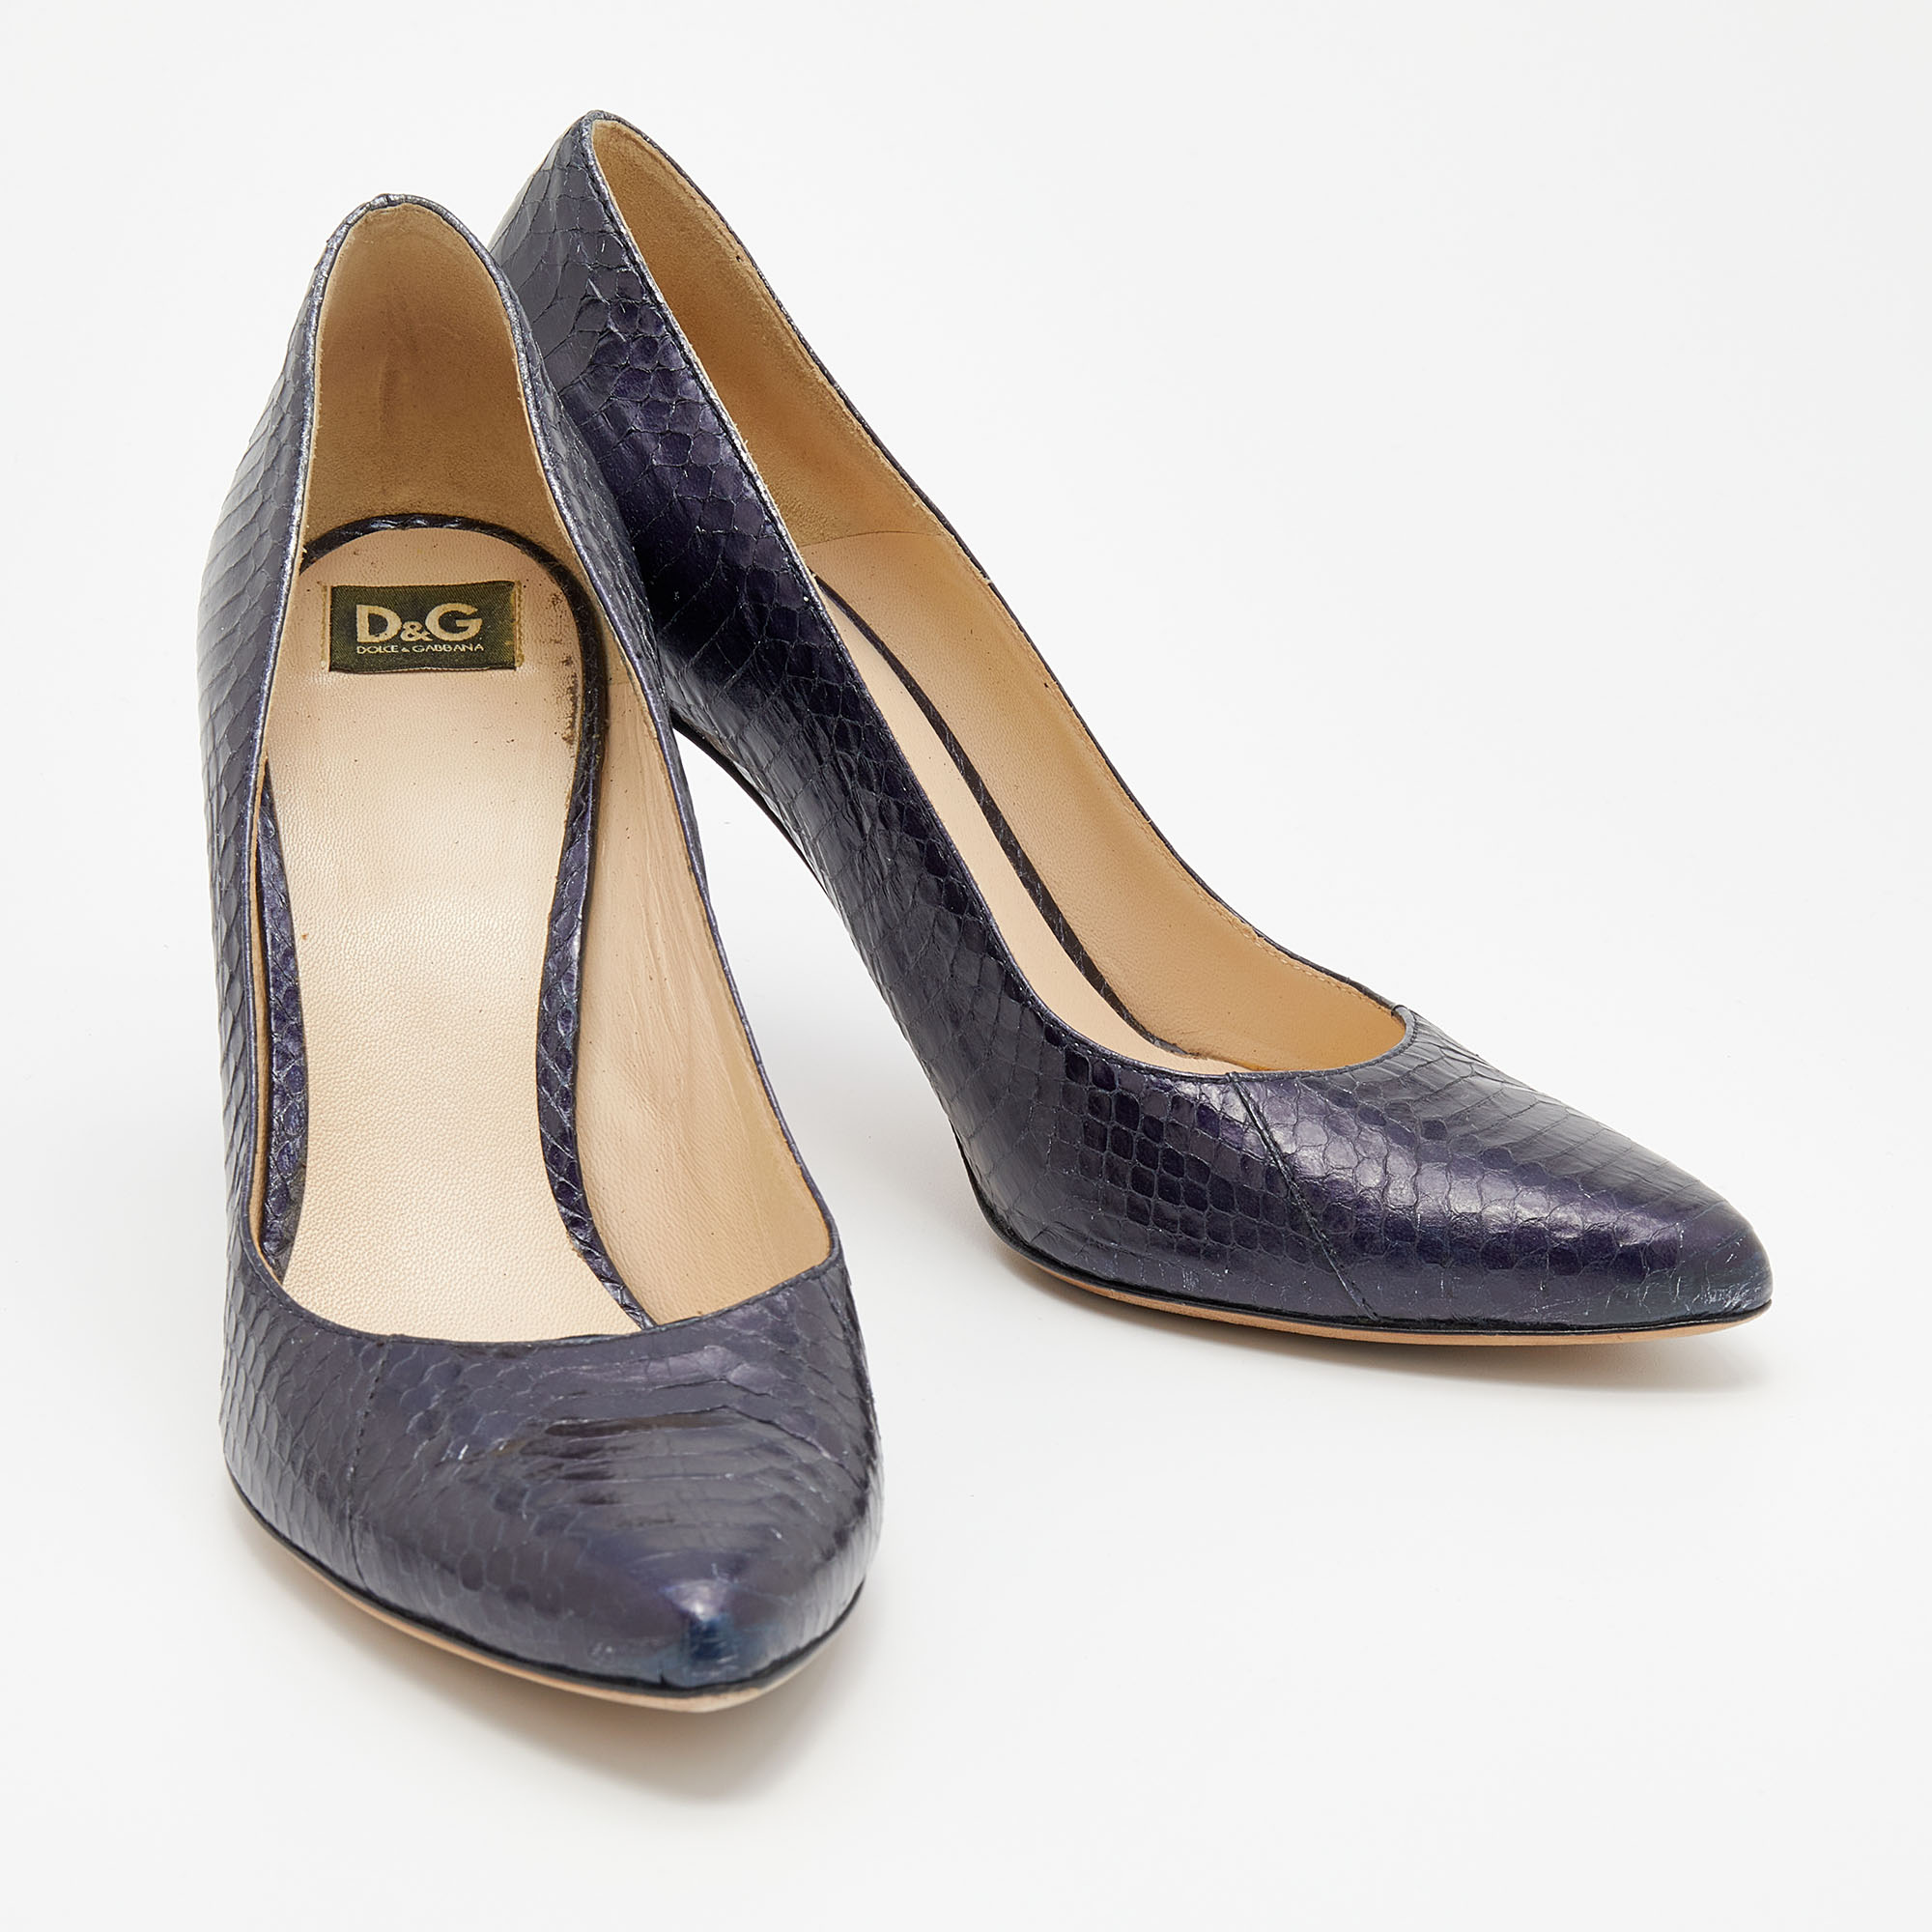 D&G Blue Snakeskin Embossed Leather Pointed Toe Pumps Size 38